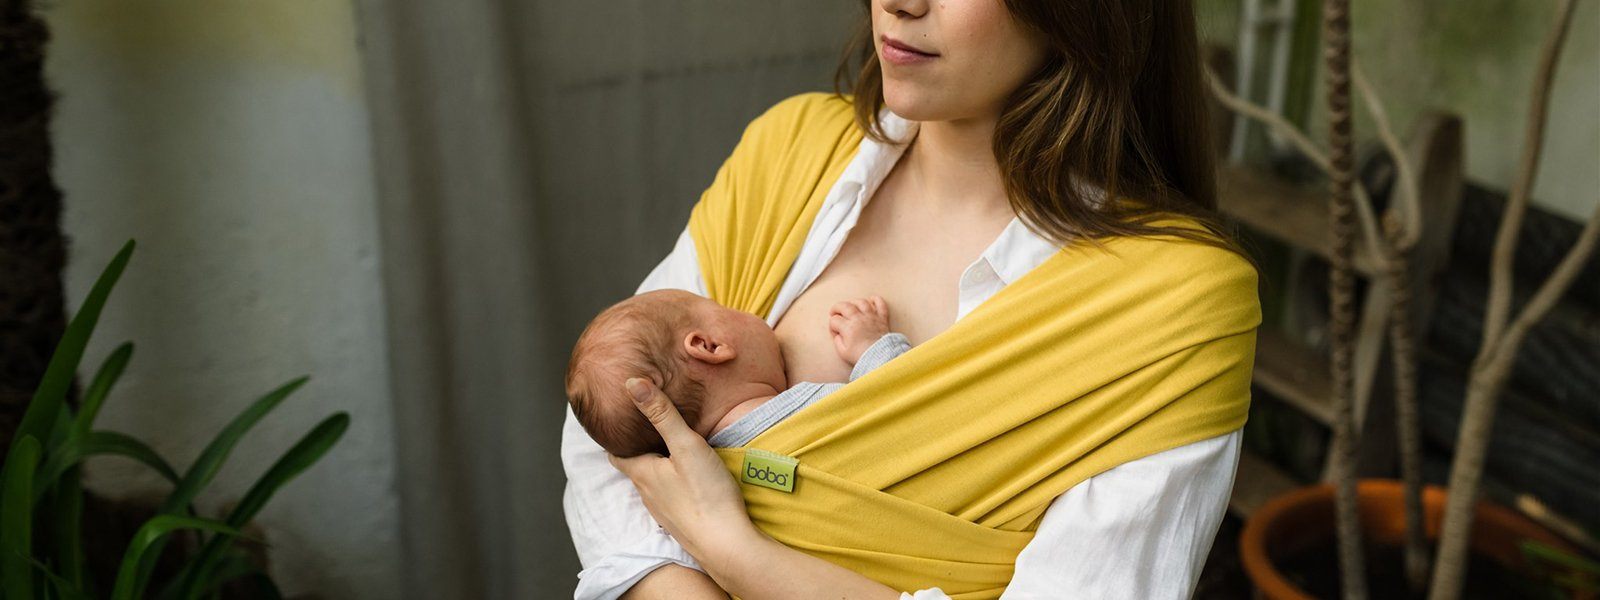 10 Reasons to Breastfeed in Public